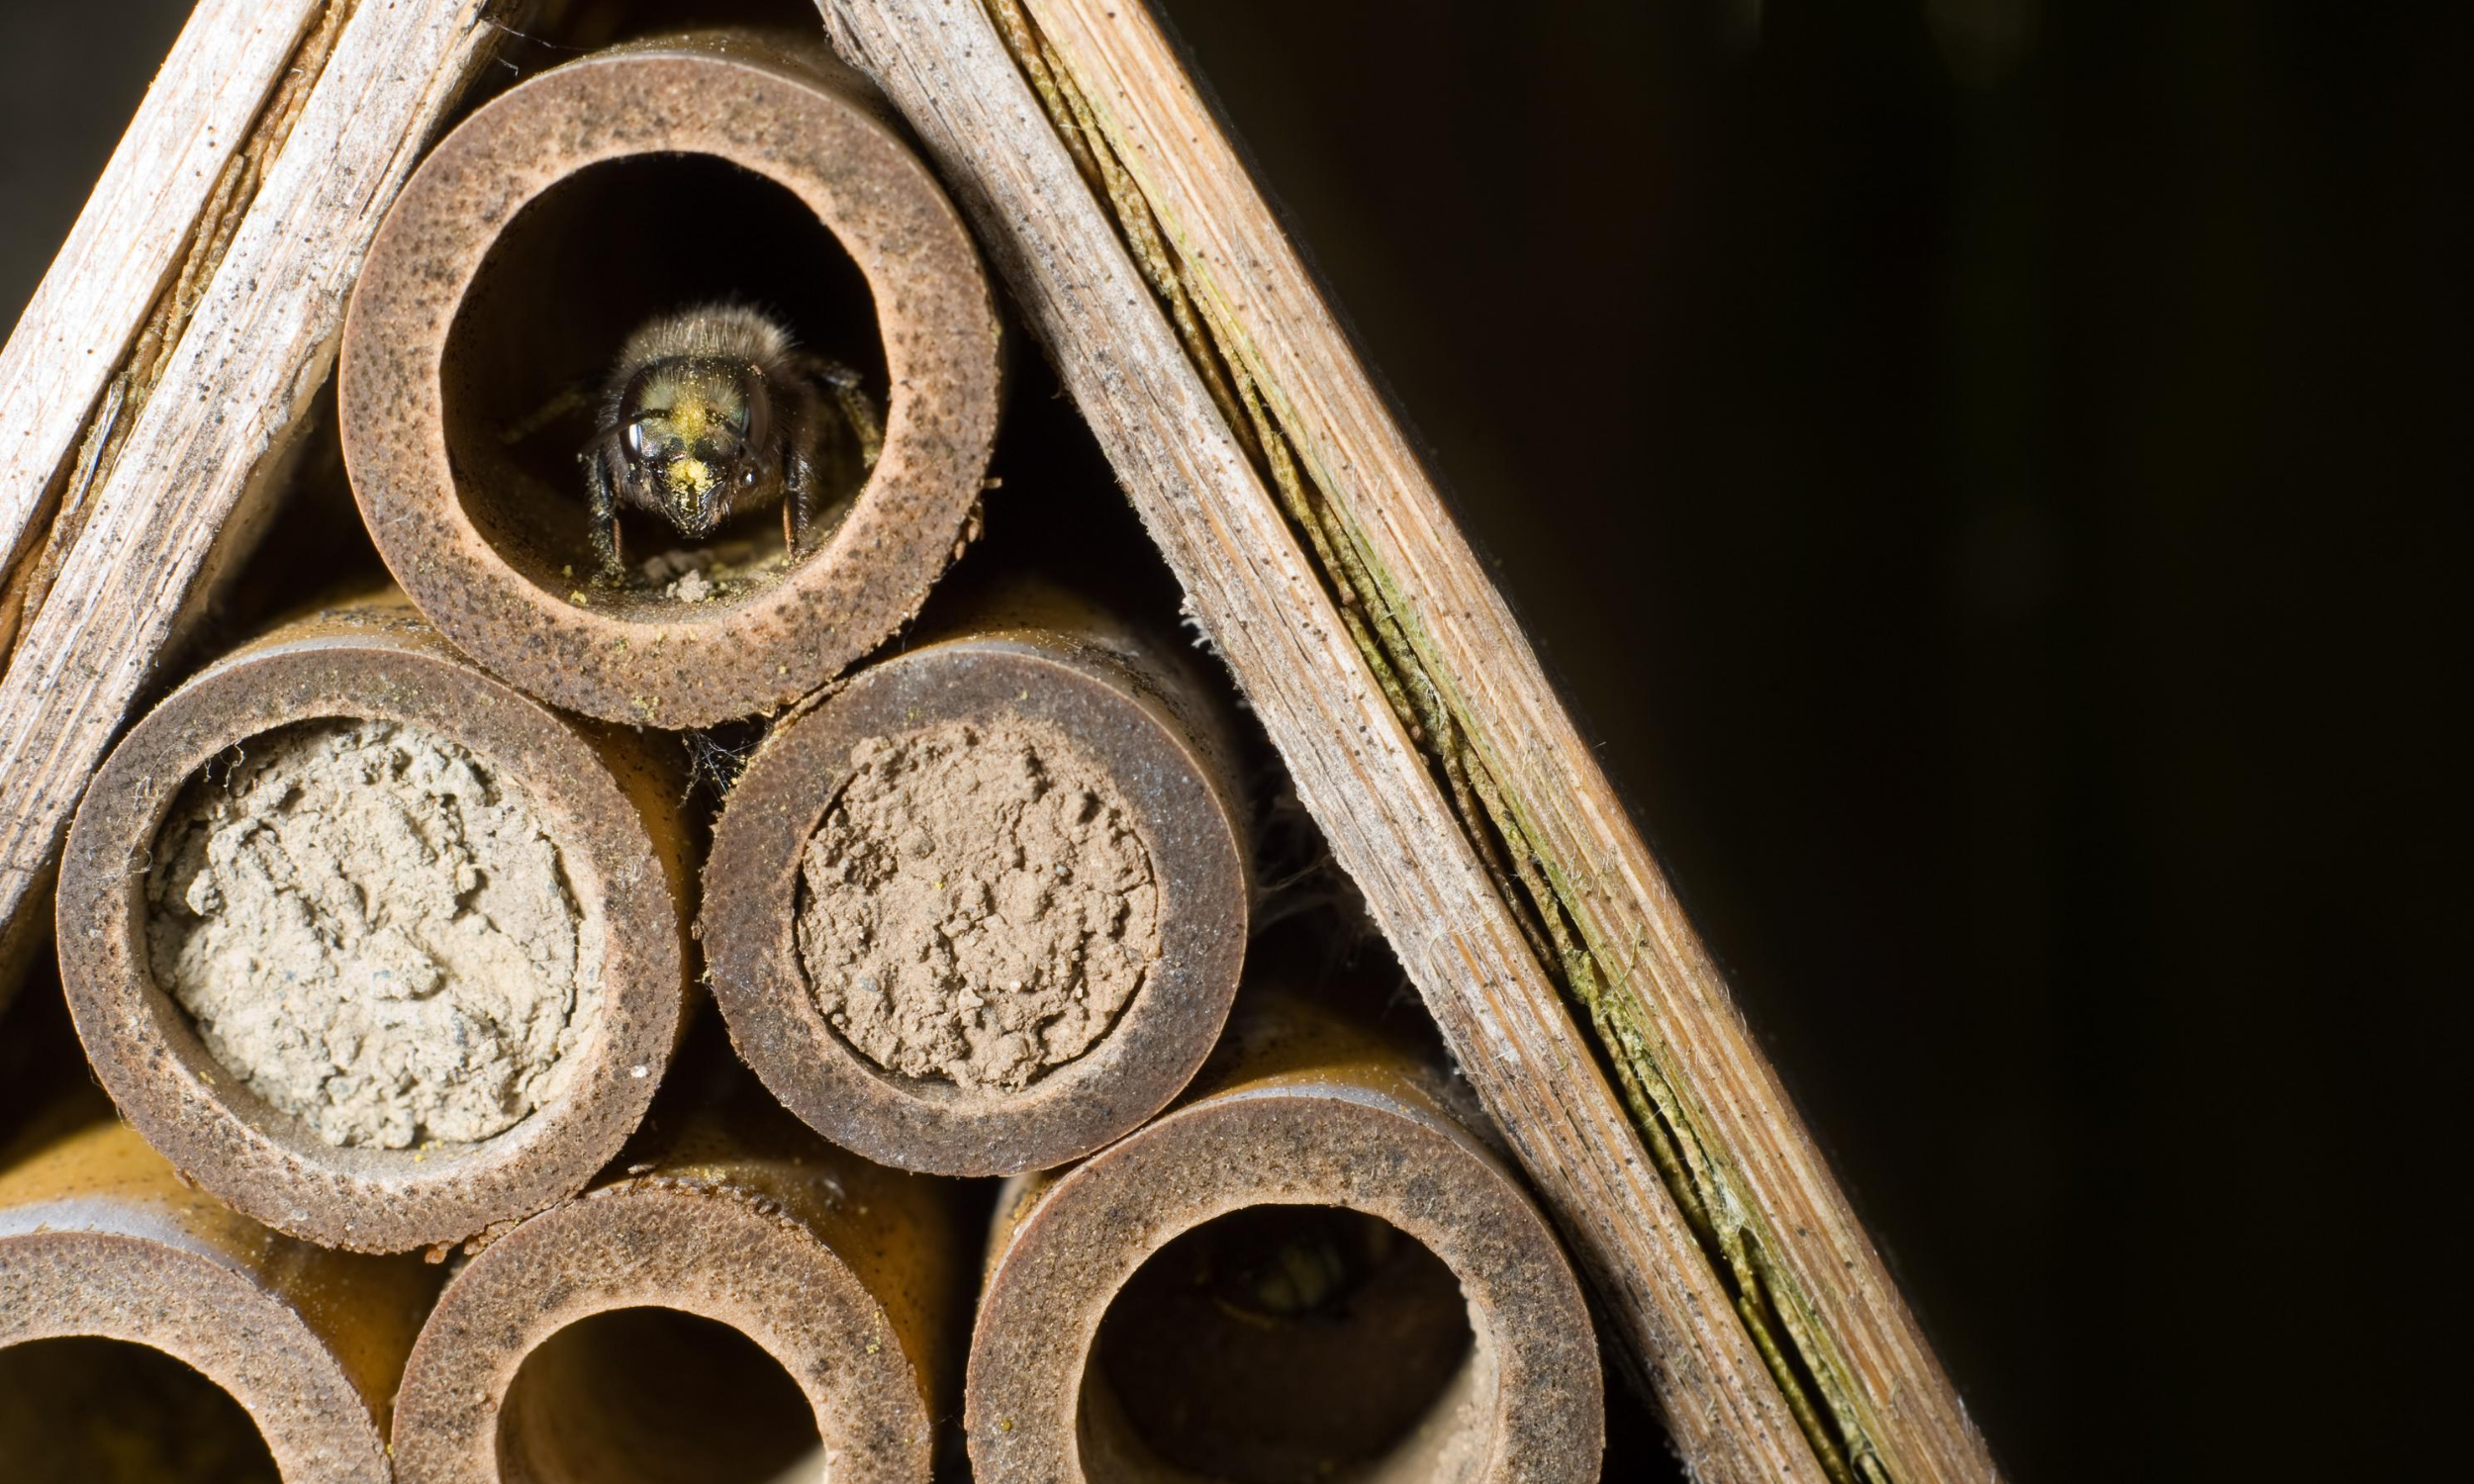 Get Buzzing: How to Attract Mason Bees to Your Garden